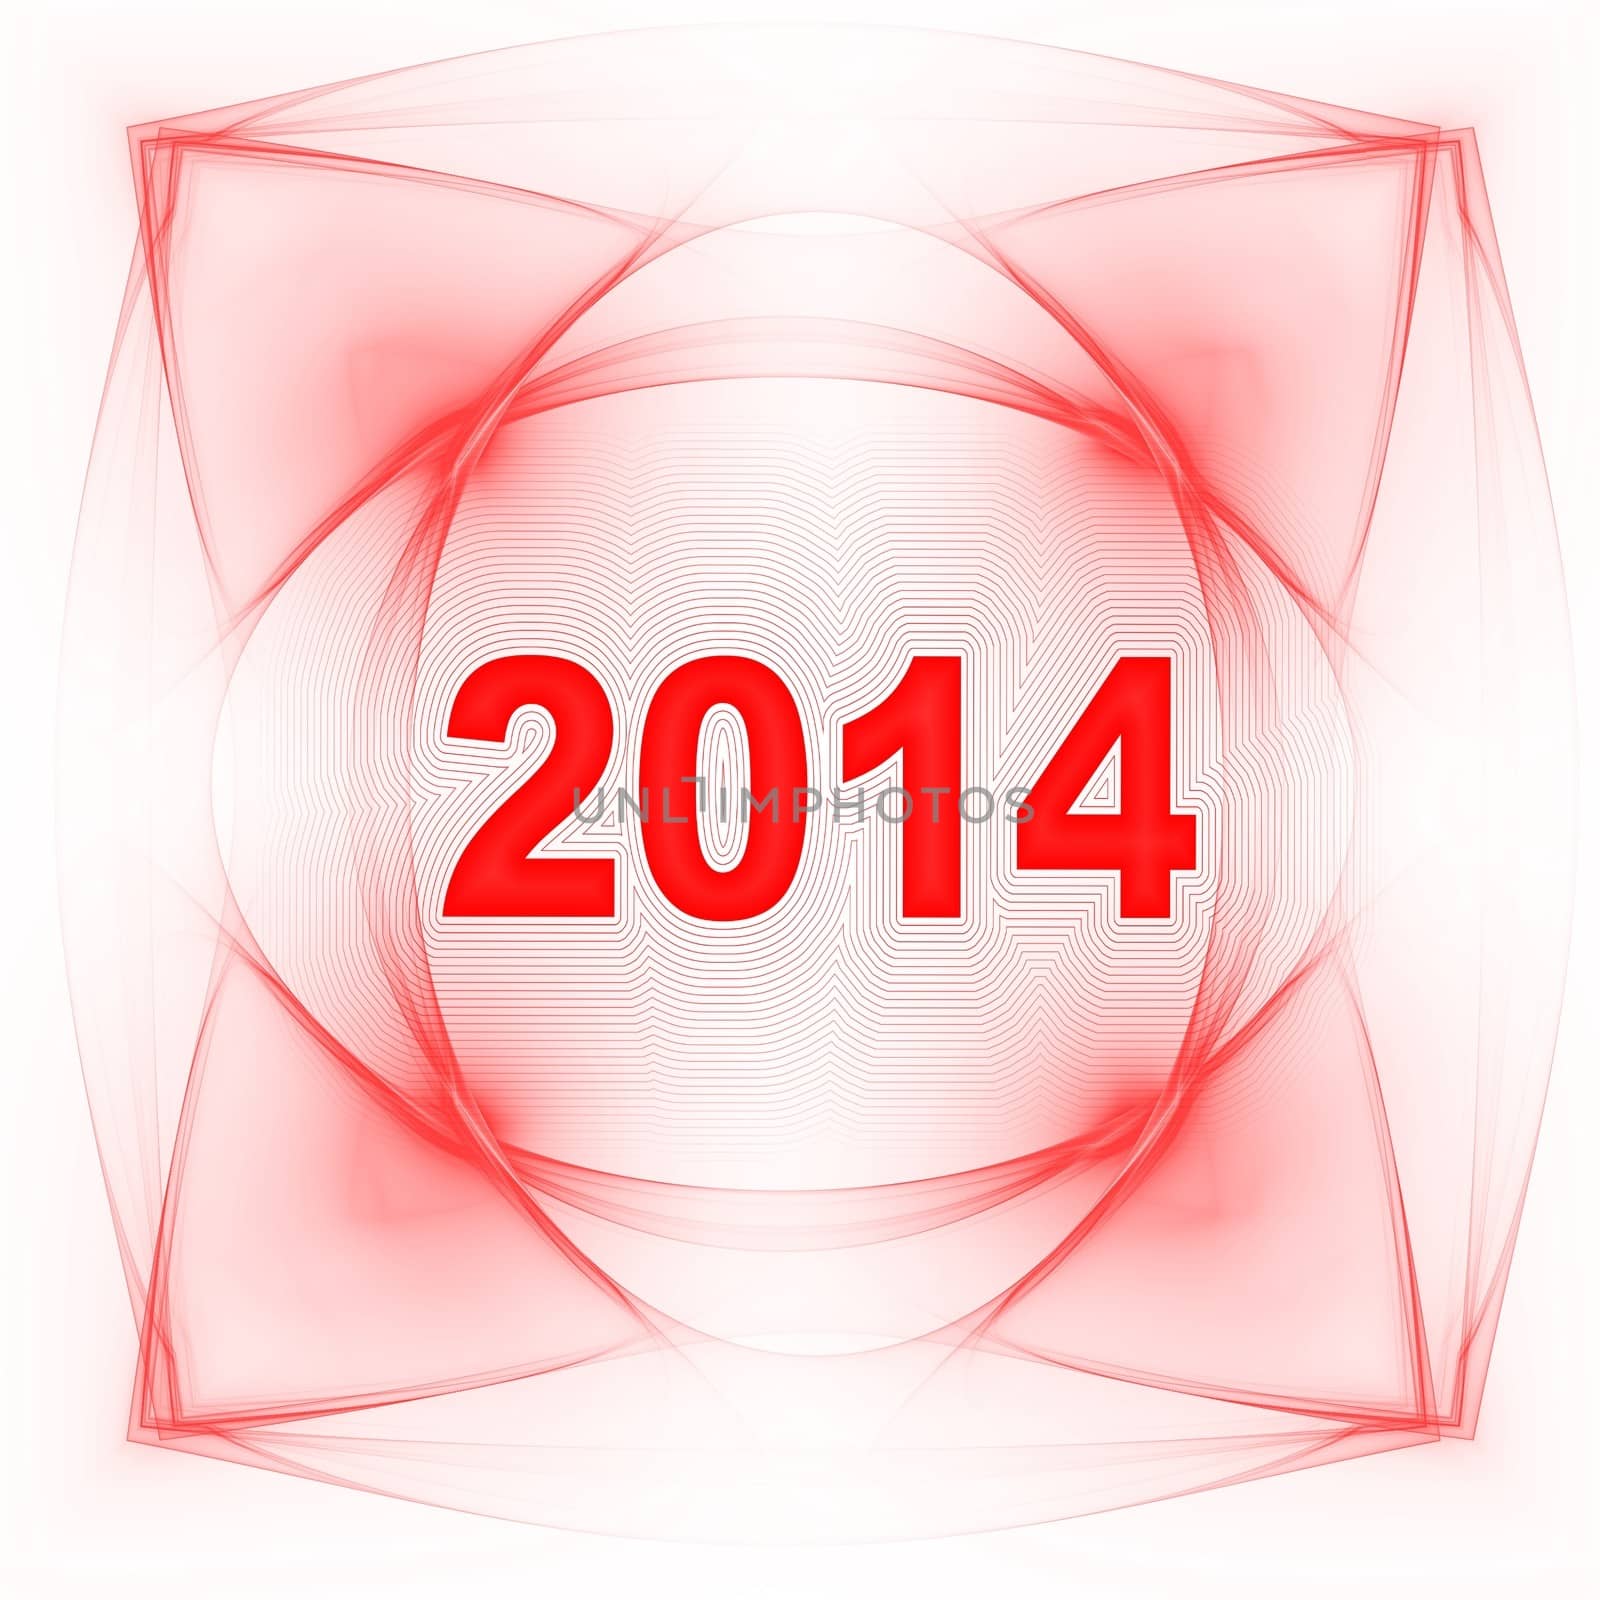  new year 2014 design  by lkant